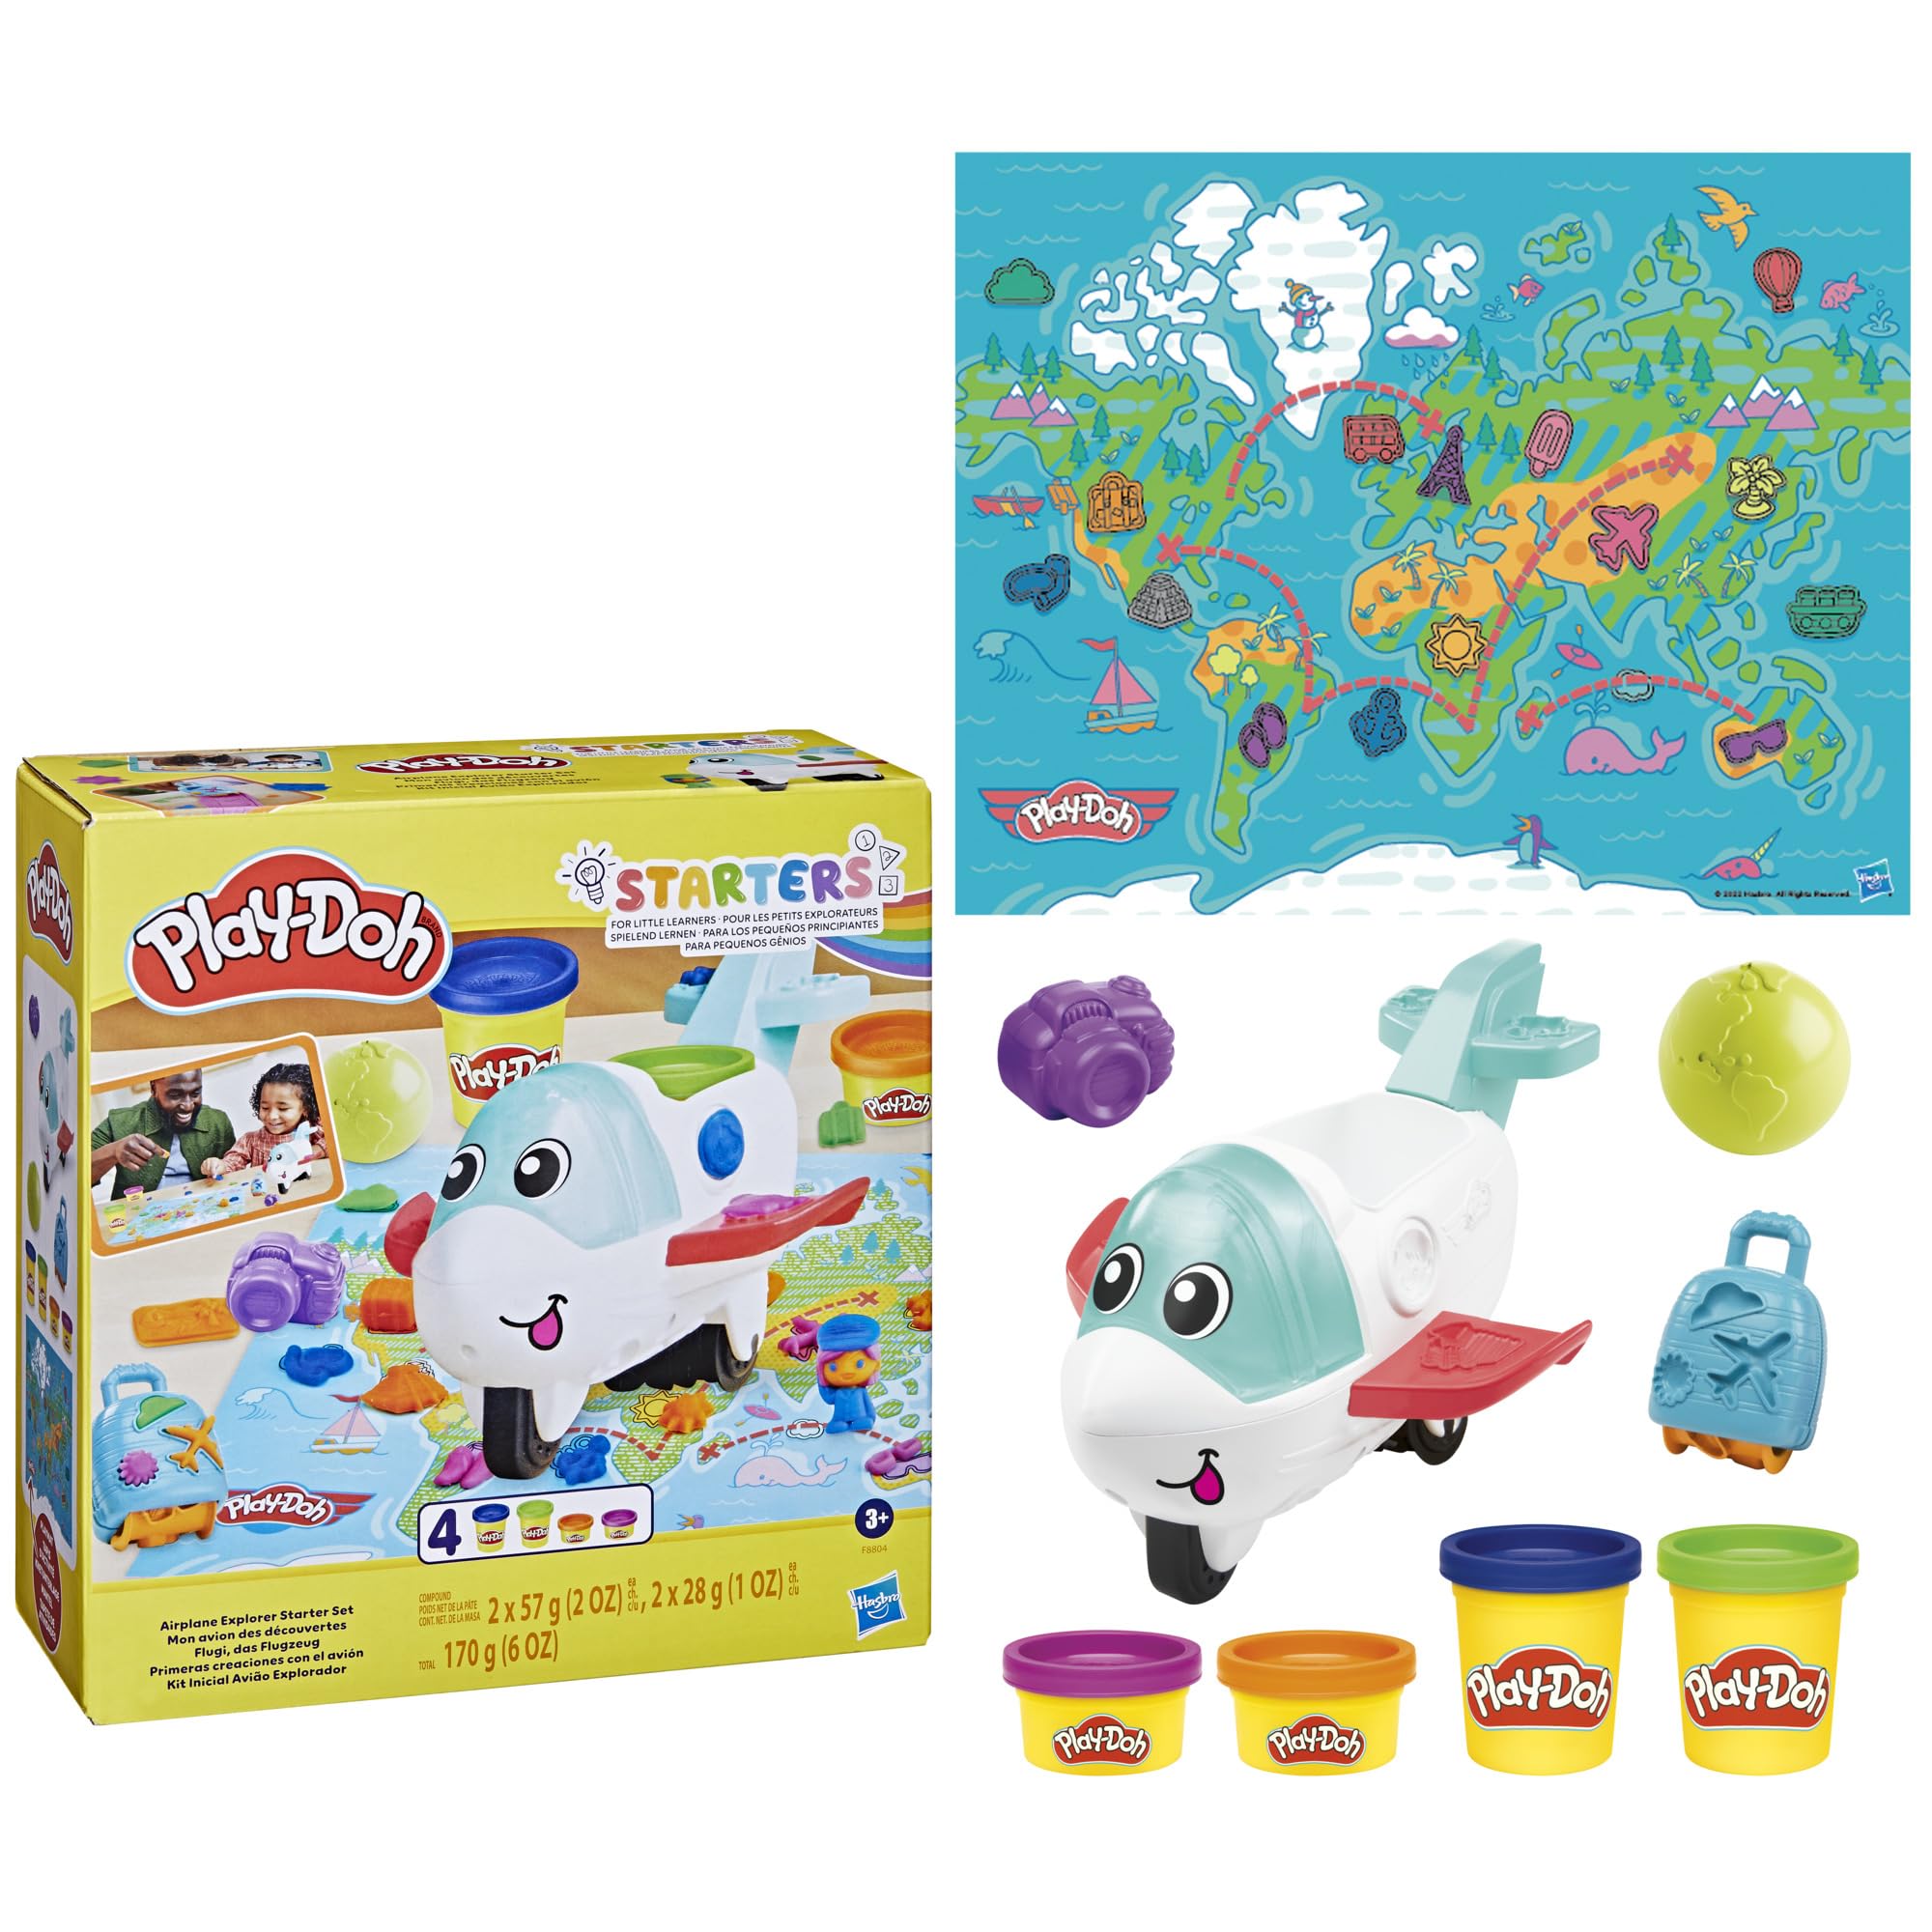 Play-Doh Airplane Explorer Starter Set, Preschool Toys for 3 Year Old Girls & Boys & Up with Jet, World Map Playmat, 3 Accessories, & 4 Modeling Compound Colors